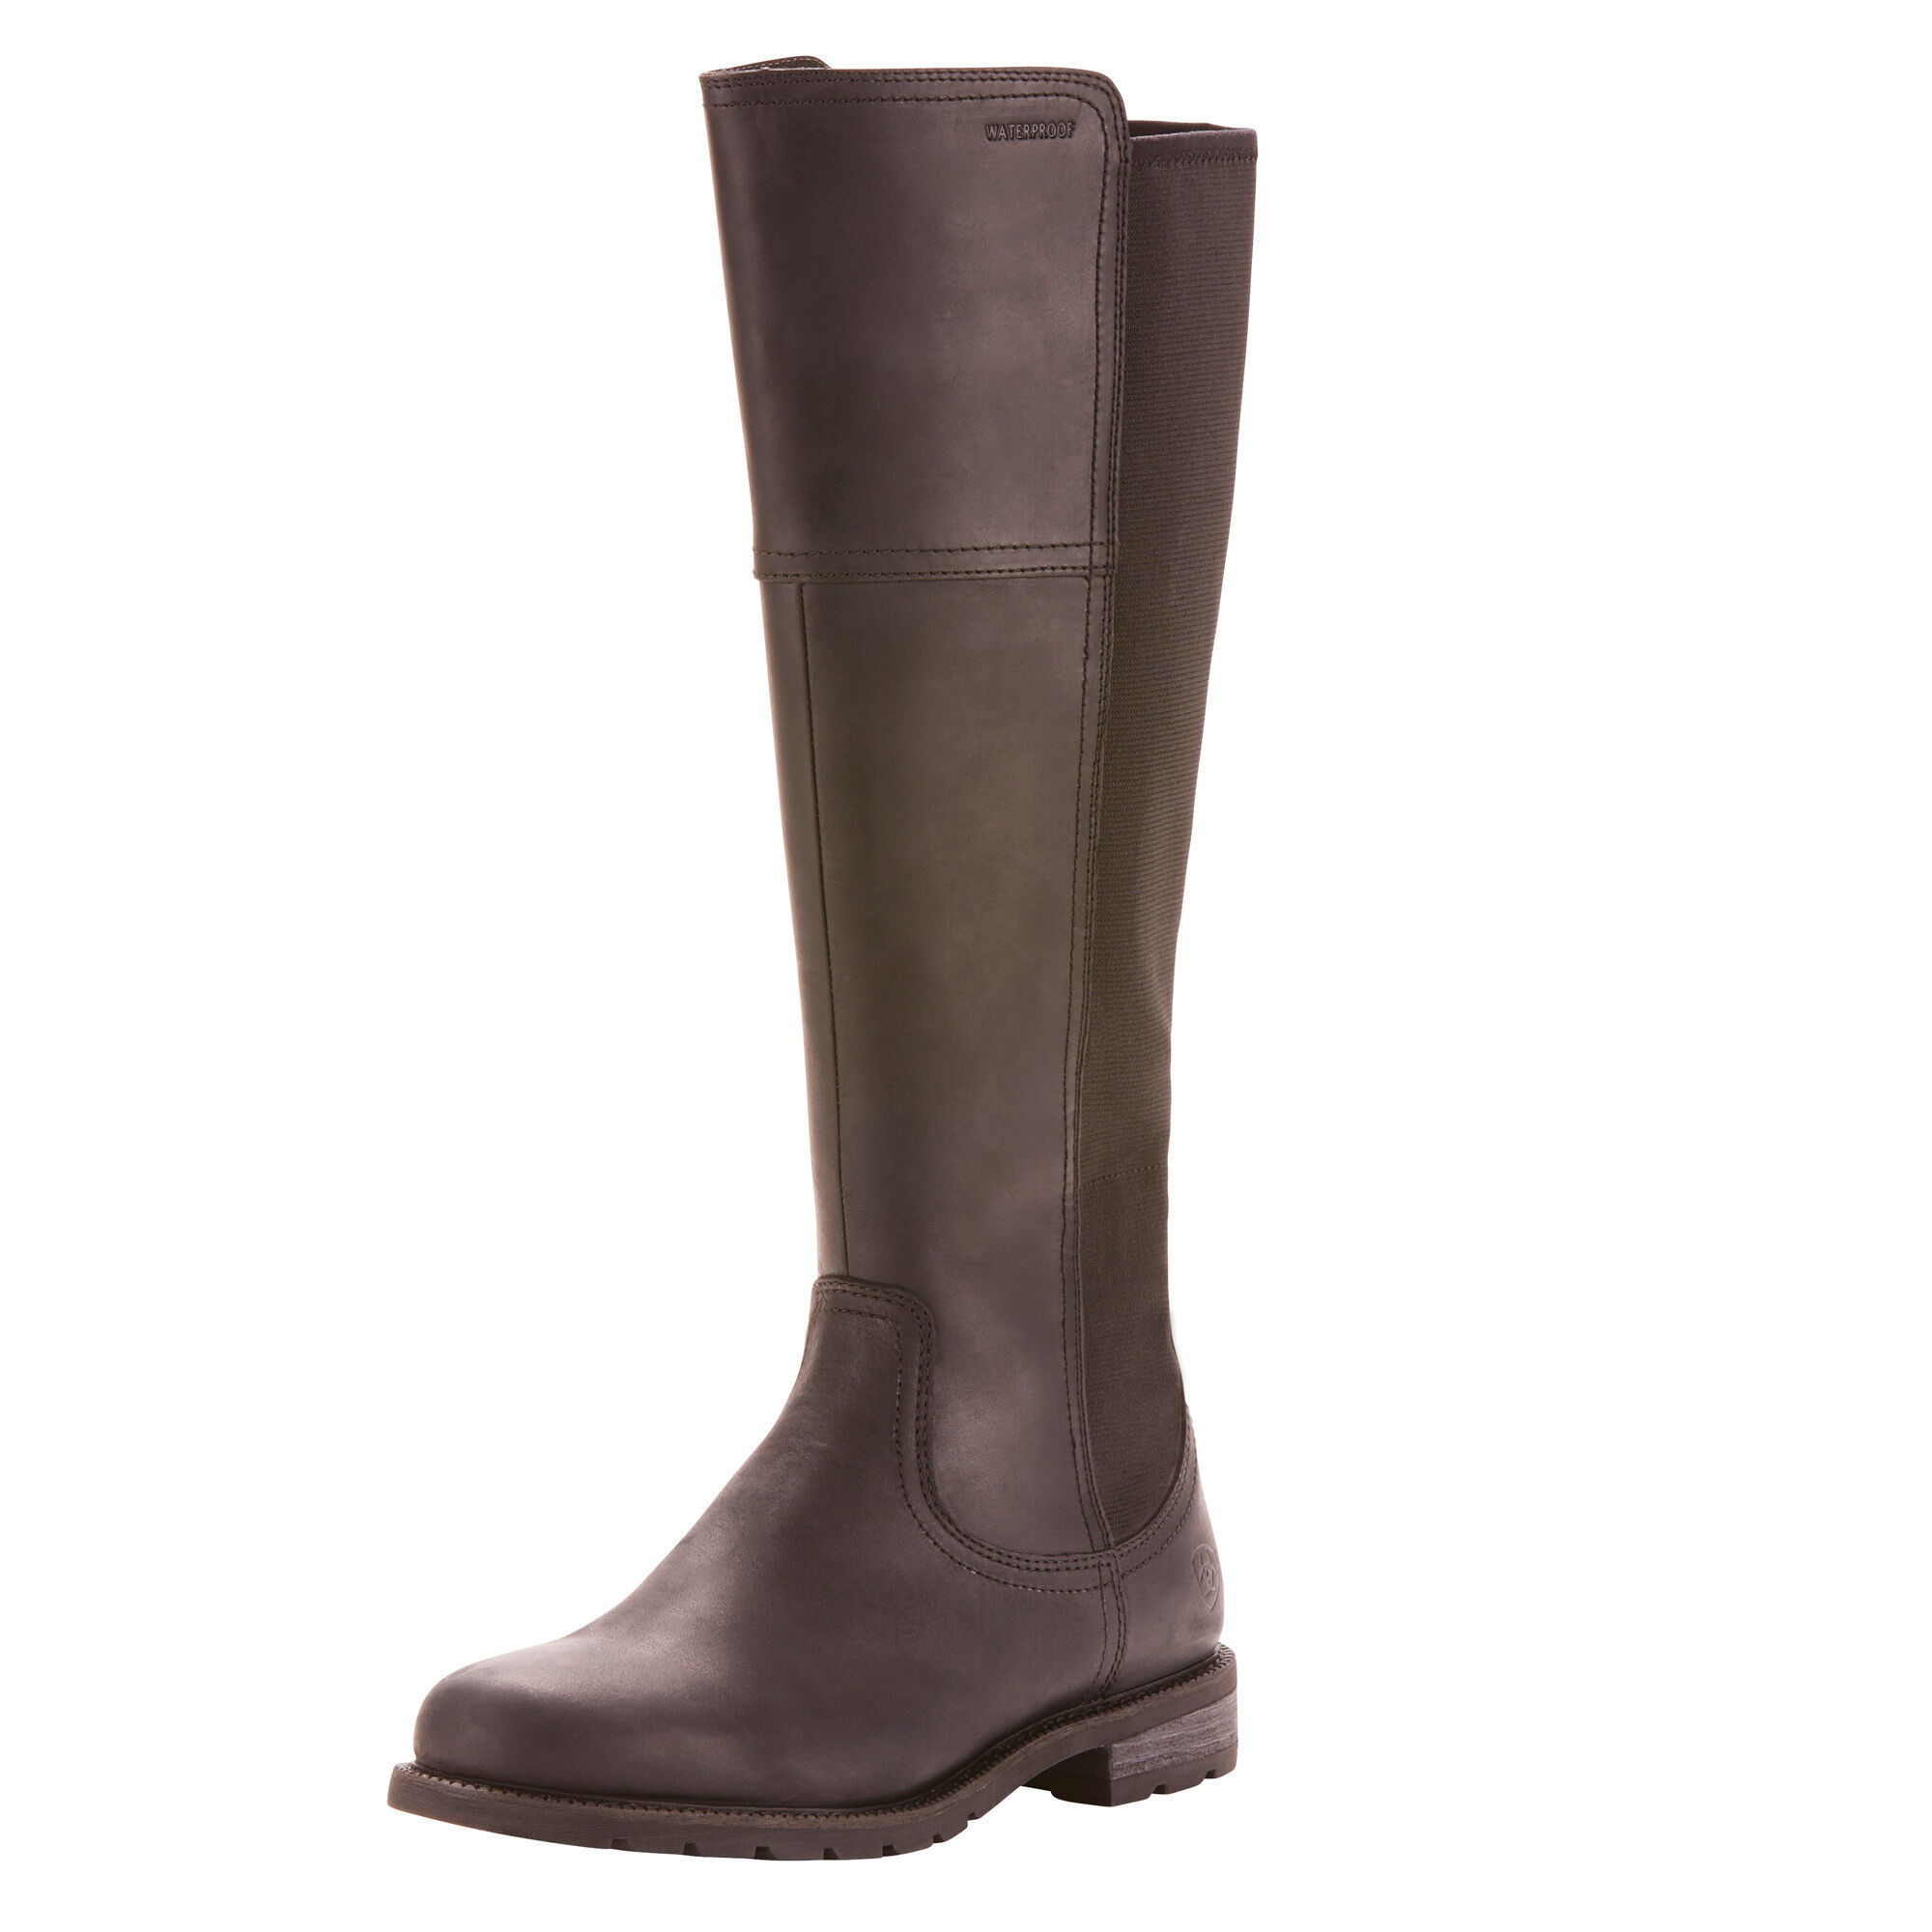 Women's Sutton Waterproof Boots in Black Leather  by Ariat